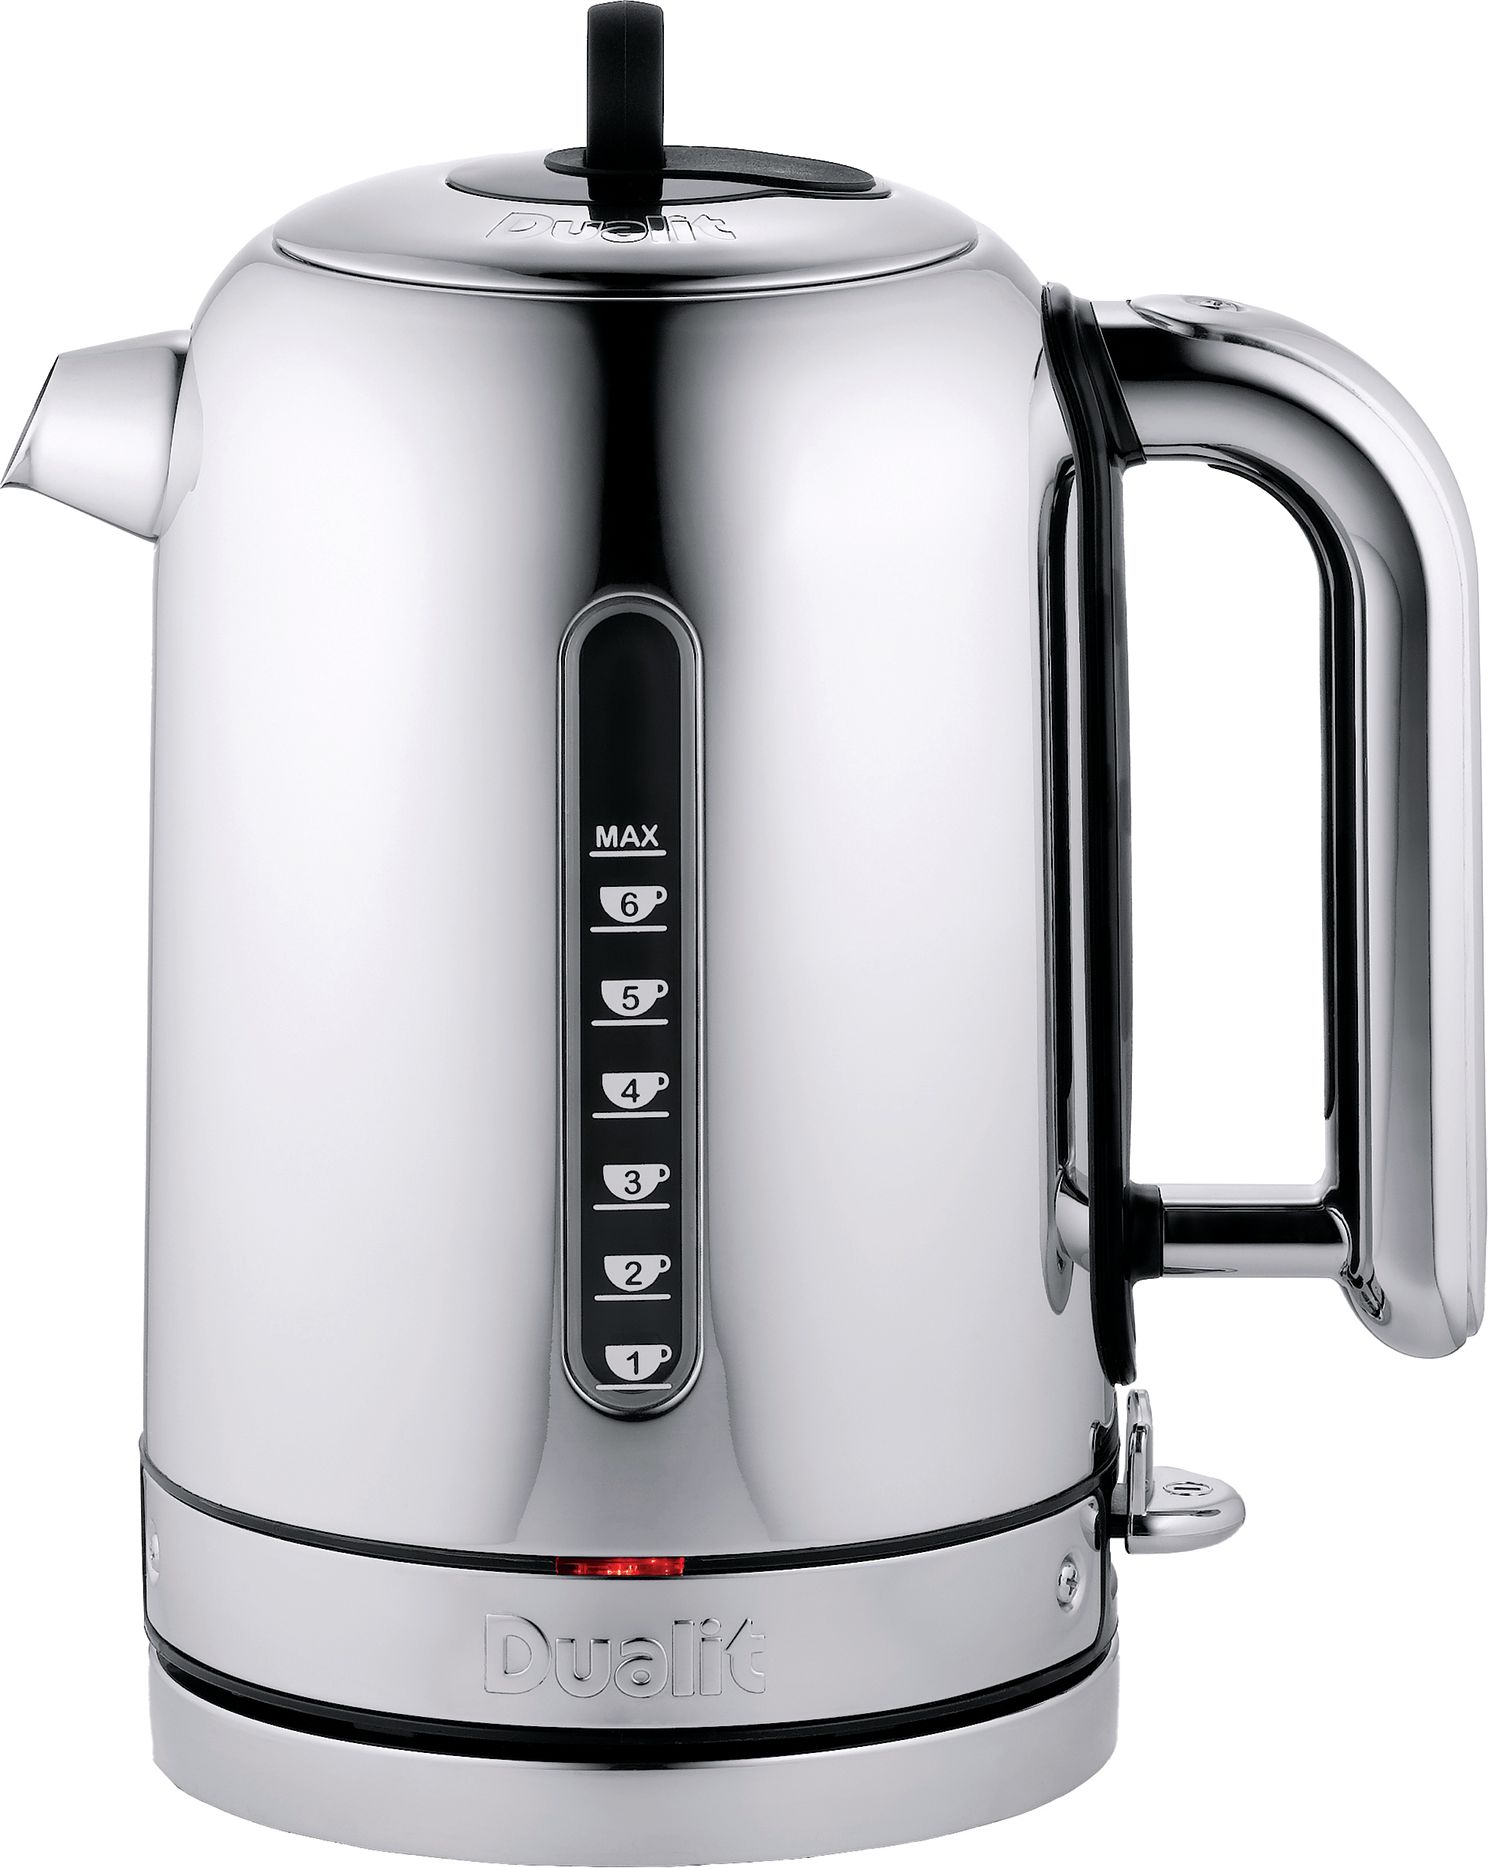 Dualit Classic 72796 Kettle - Stainless Steel, Stainless Steel